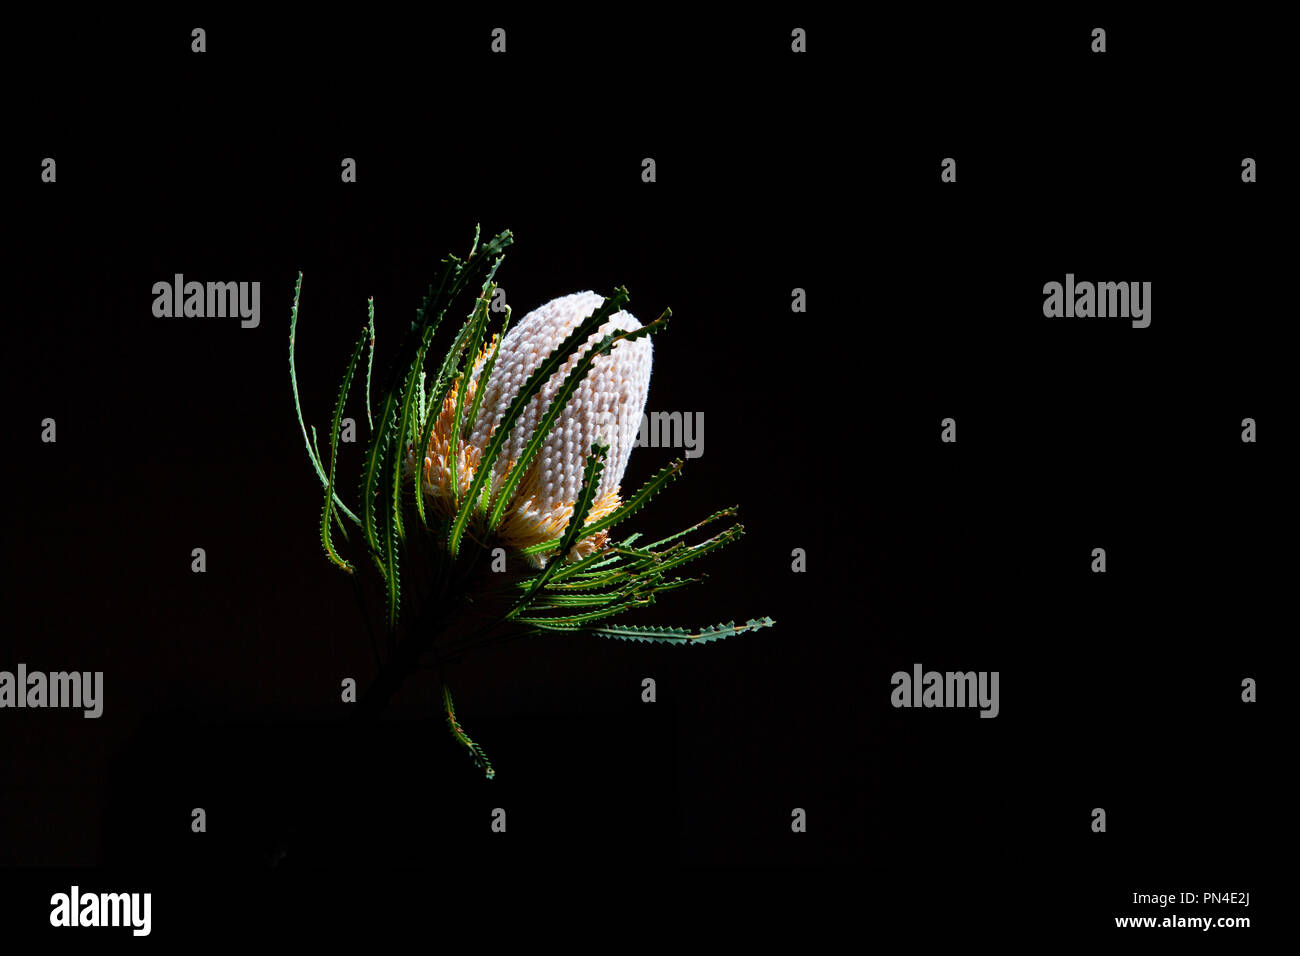 Orange Banksia flower on black background with copy space Stock Photo